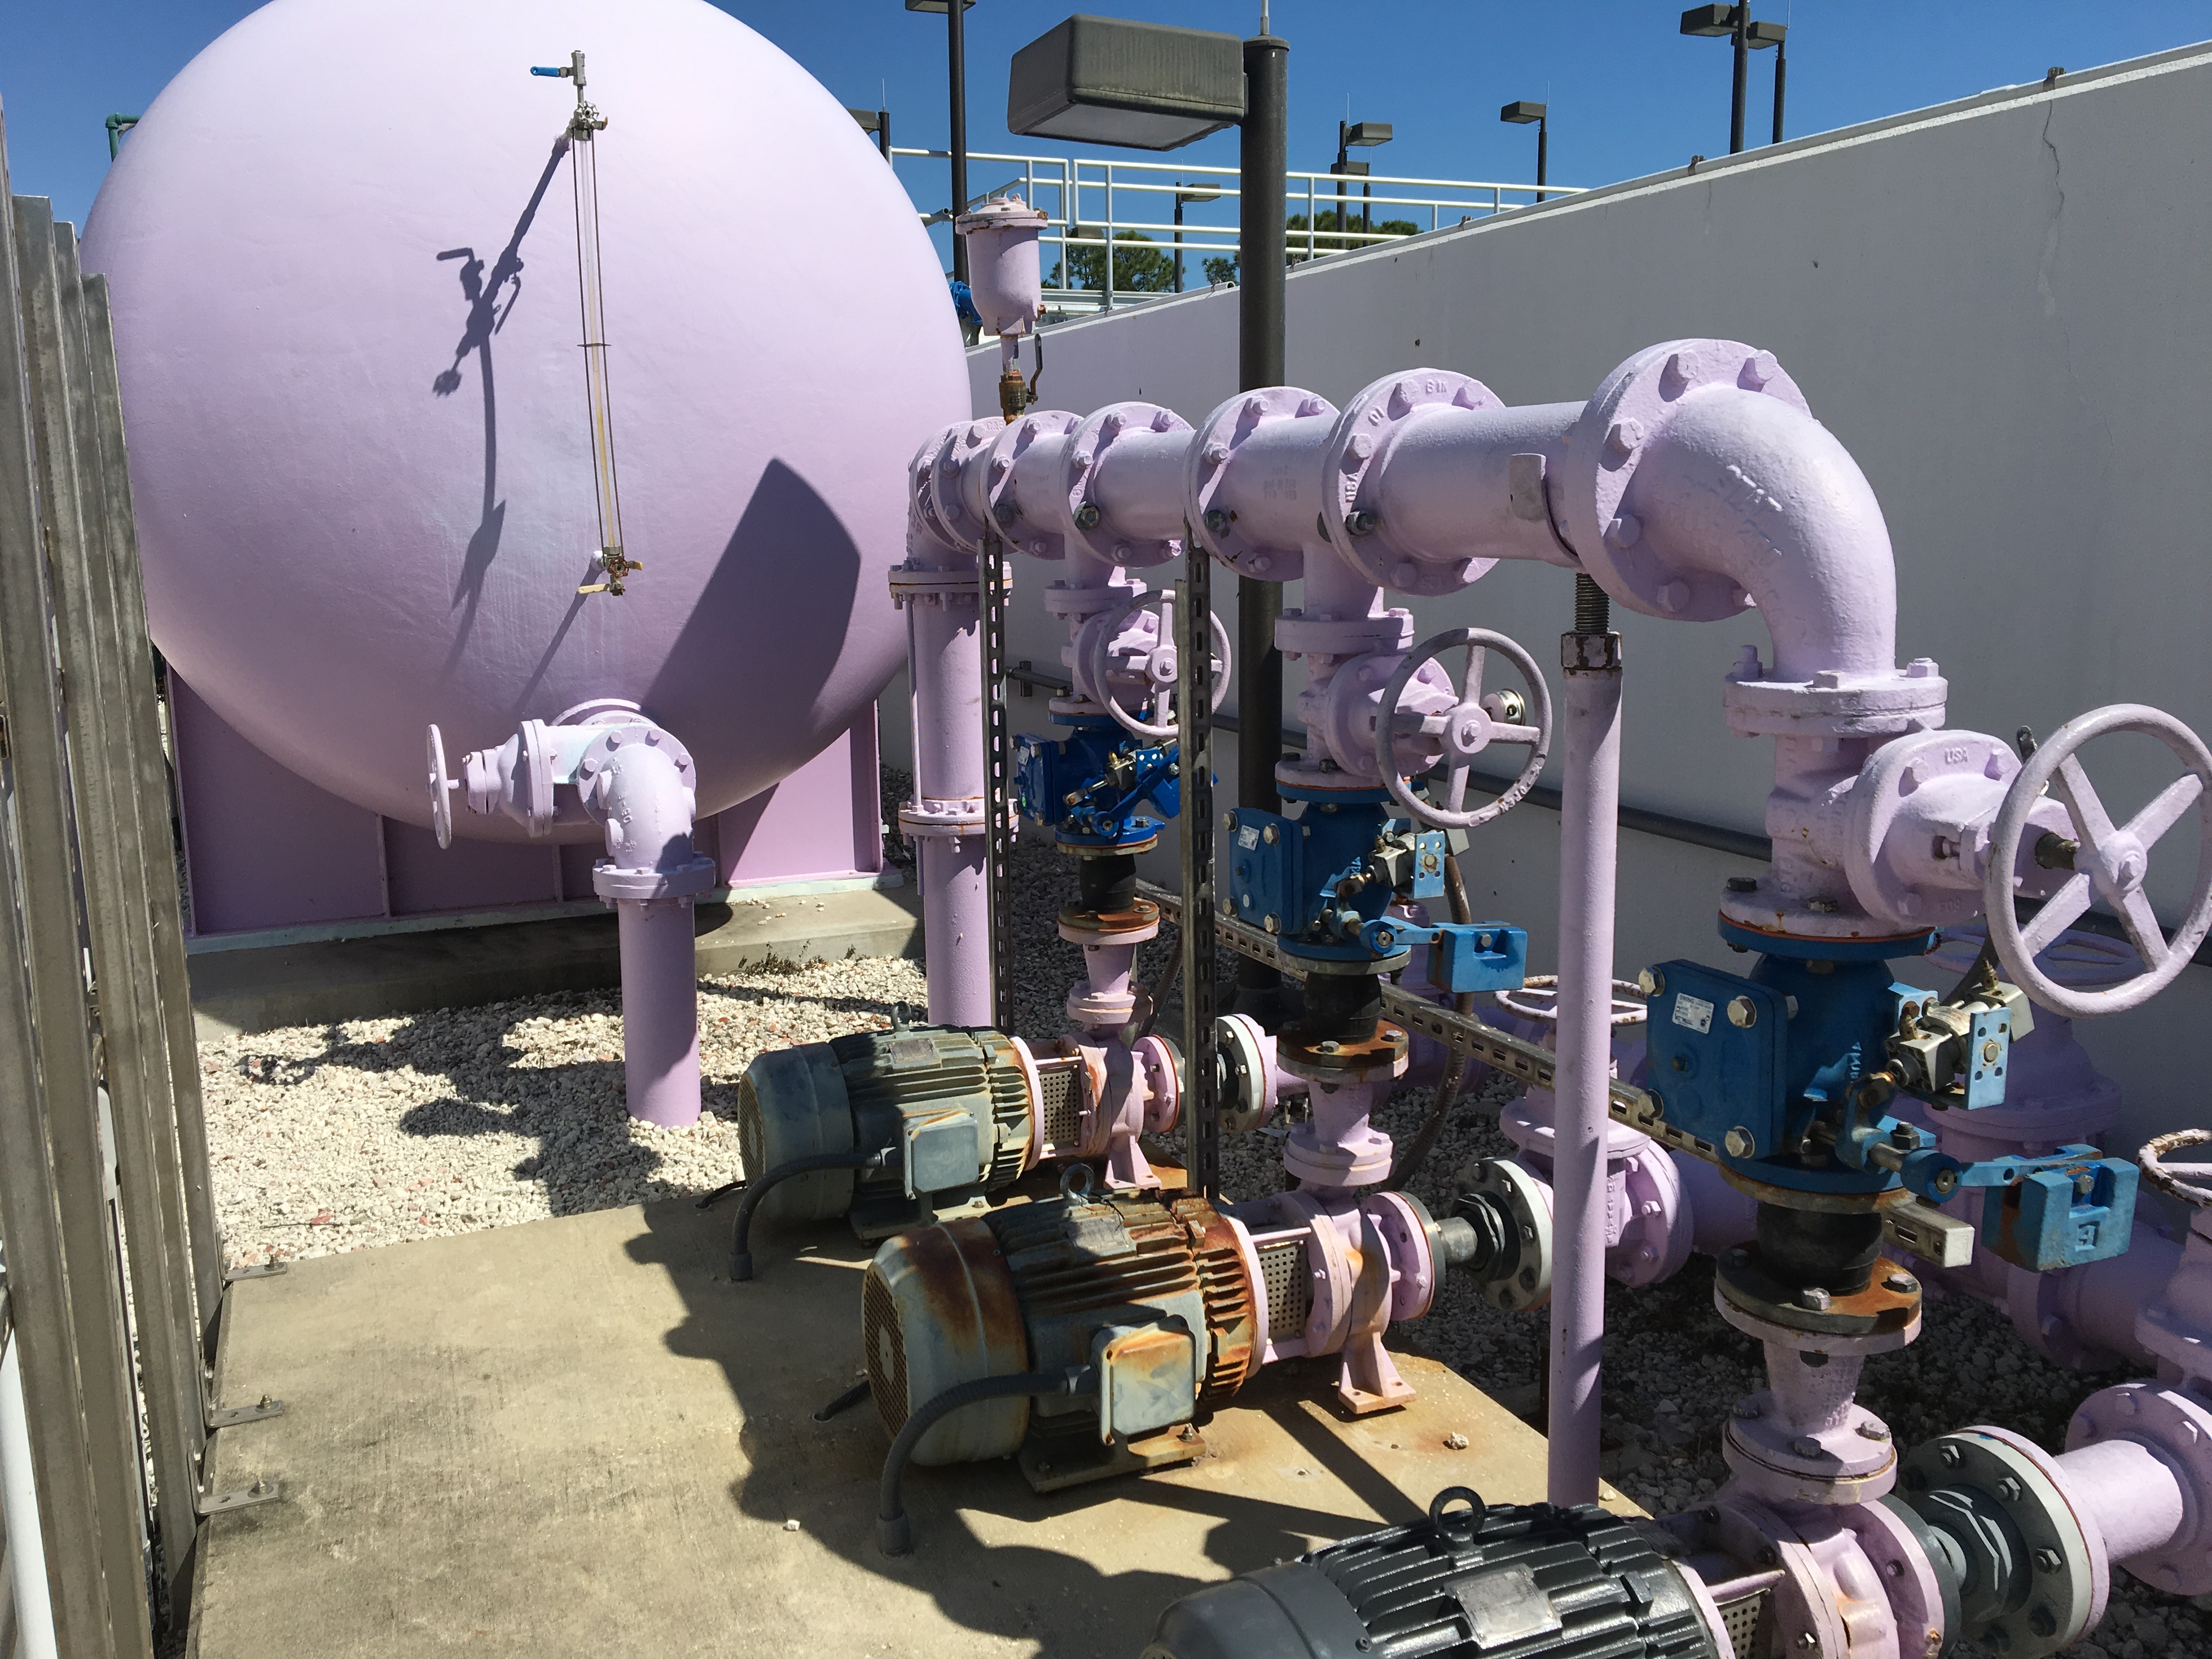 Purple pipes indicate reuse water